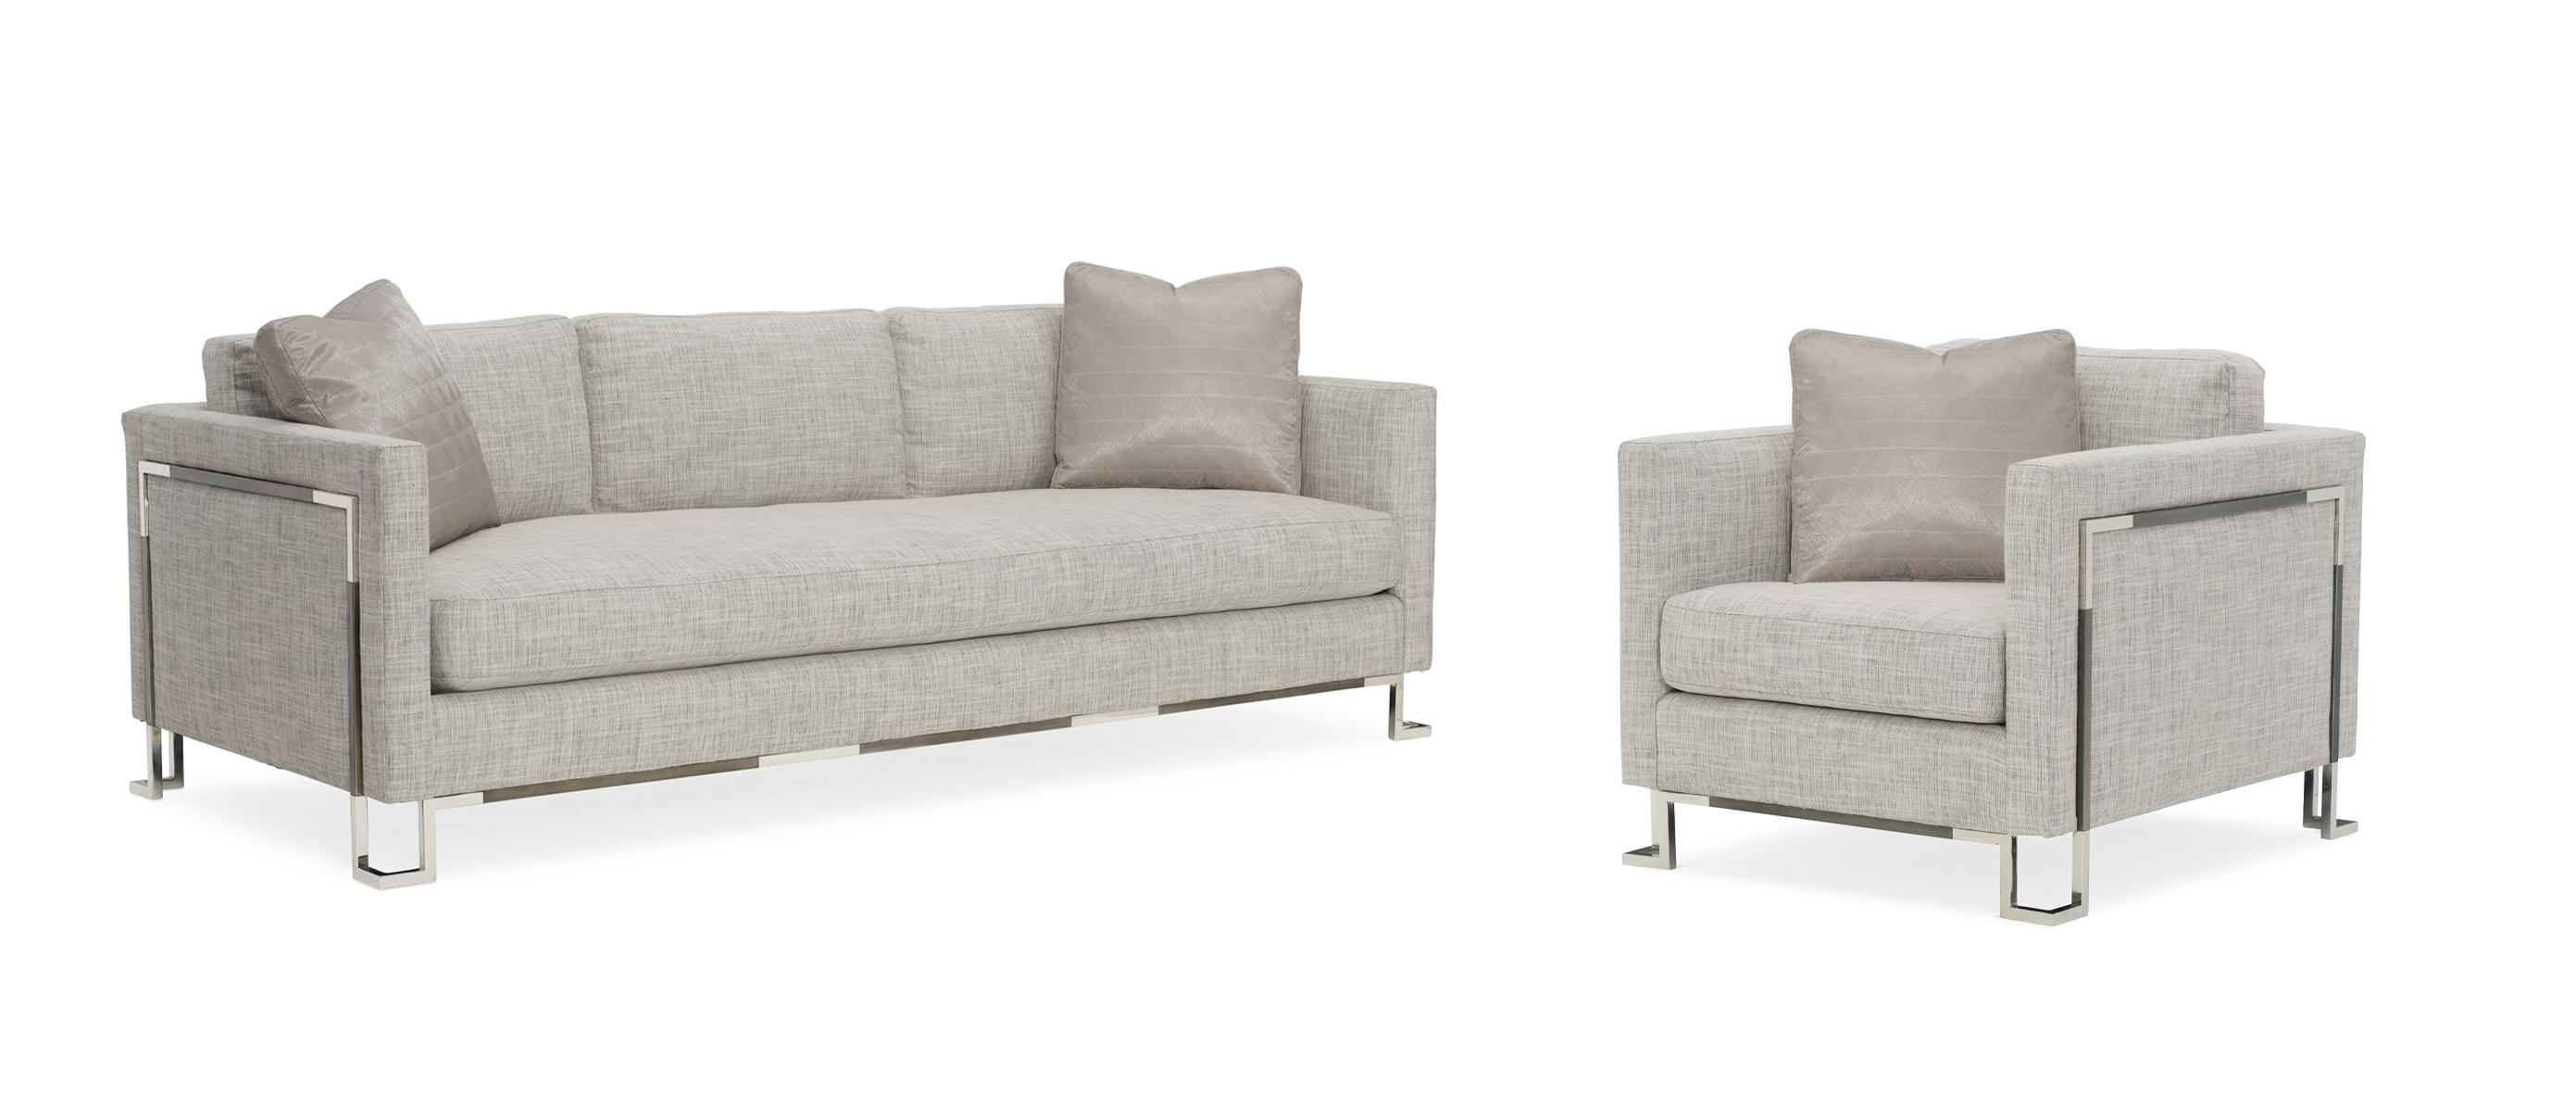 

    
Moonlight Silver Fabric & Stainless-Steel Frame Sofa Set 2Pcs OPEN FRAMEWORK by Caracole
